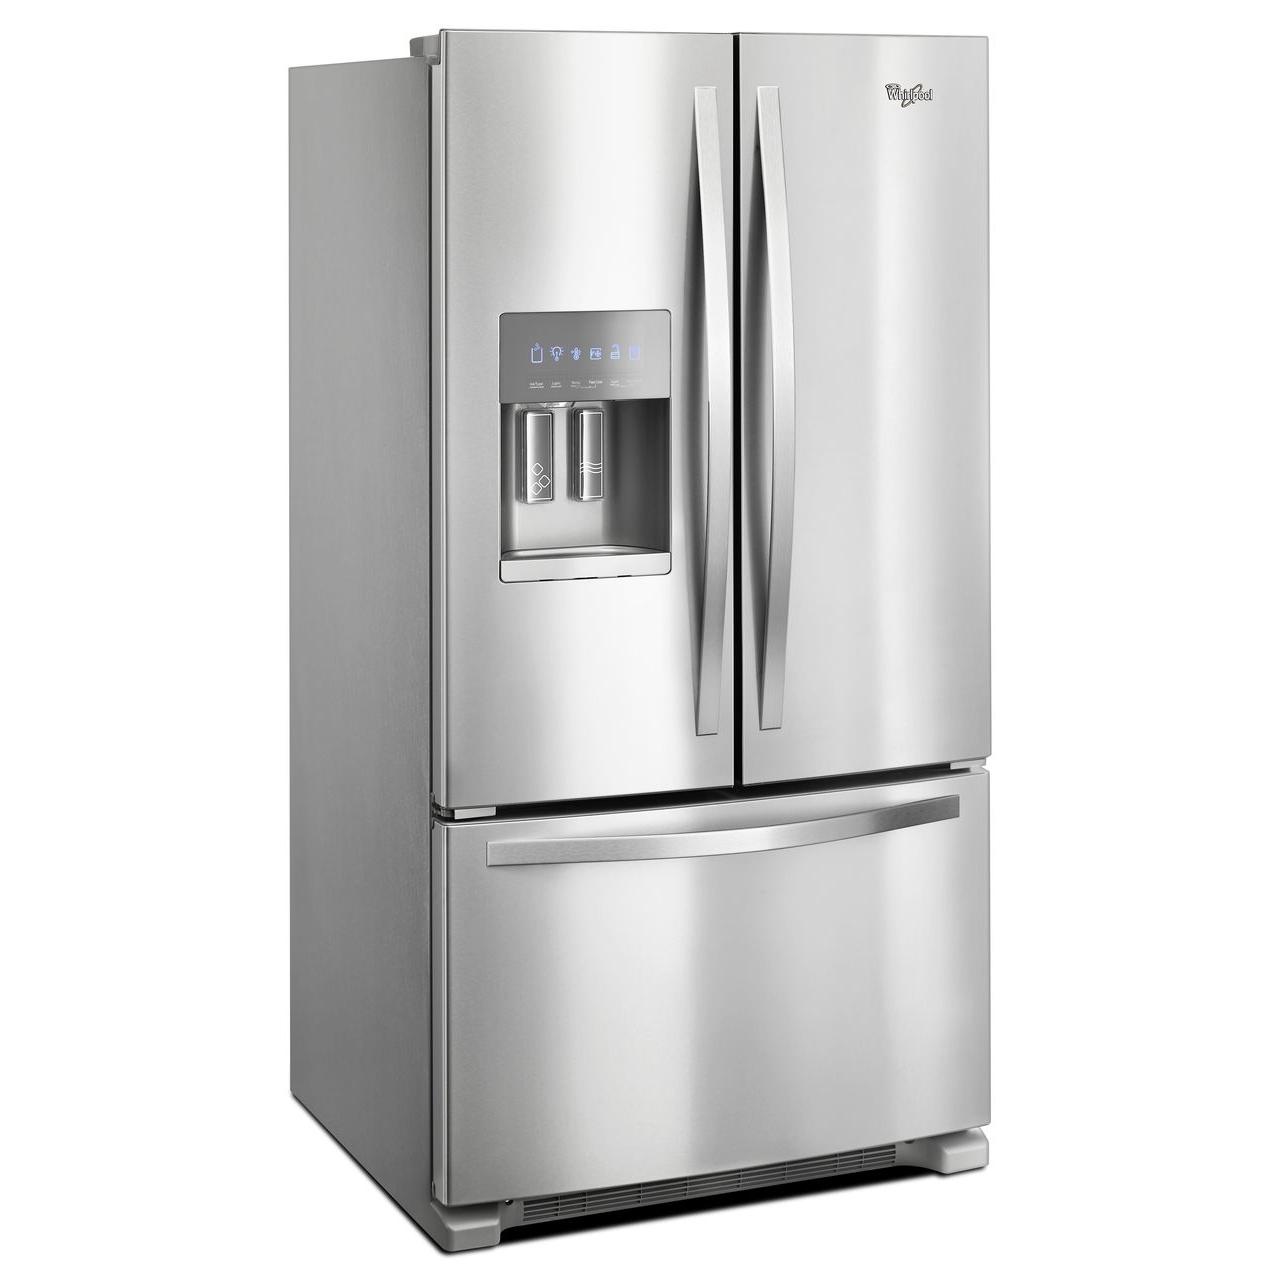 Whirlpool 36-inch, 24.7 cu. ft. French 3-Door Refrigerator with Ice and Water Dispensing System WRF555SDFZ